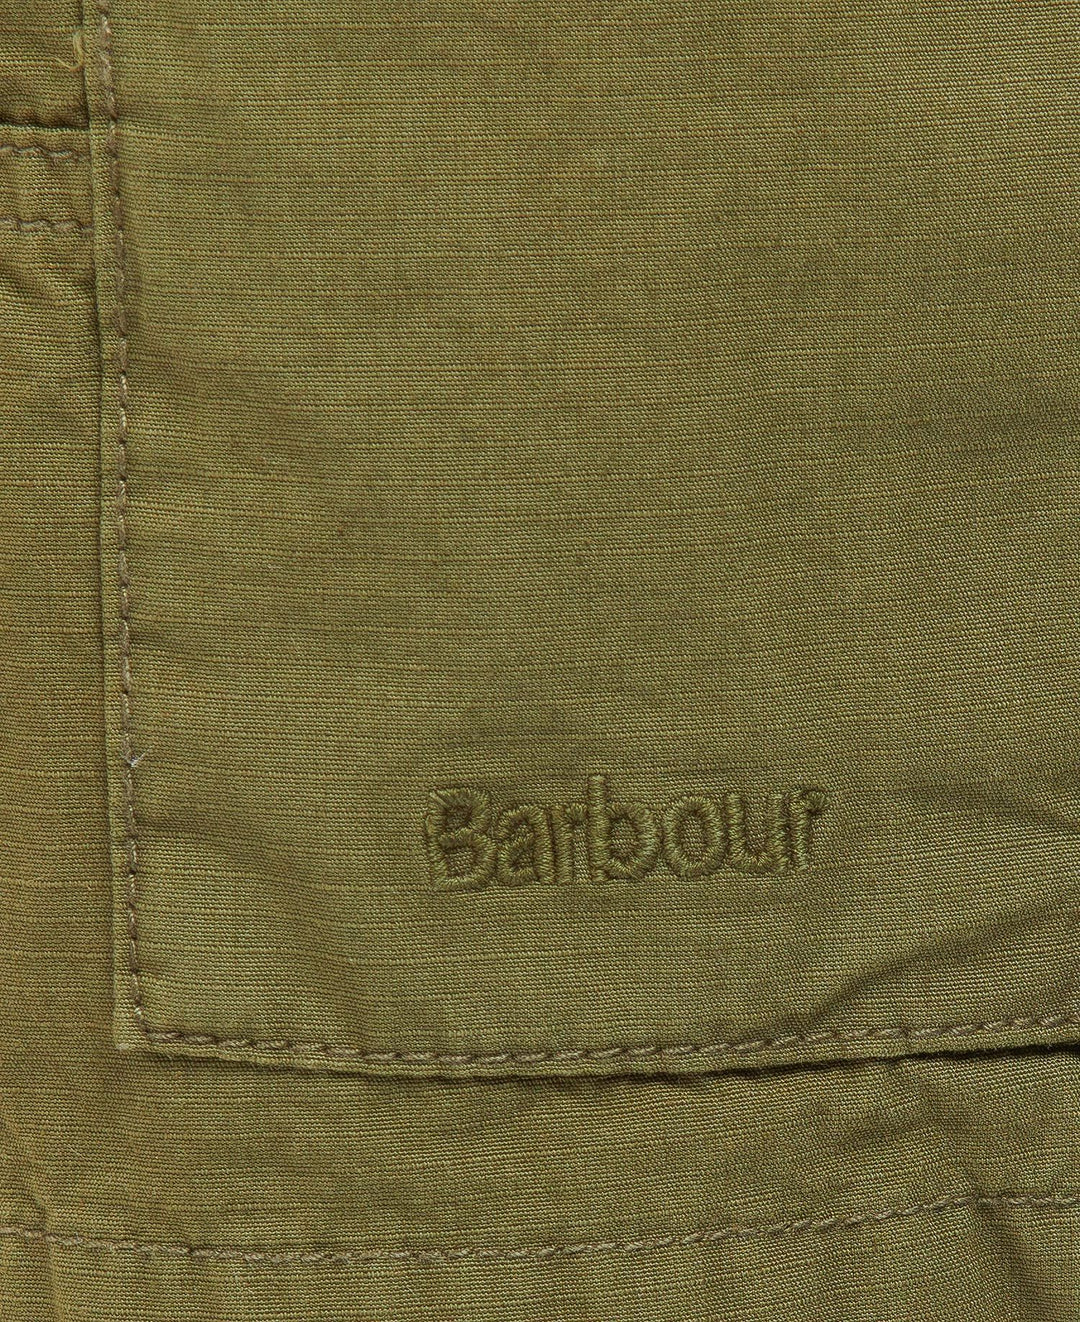 Barbour Ess Ripst Shor/Bermude MST0023